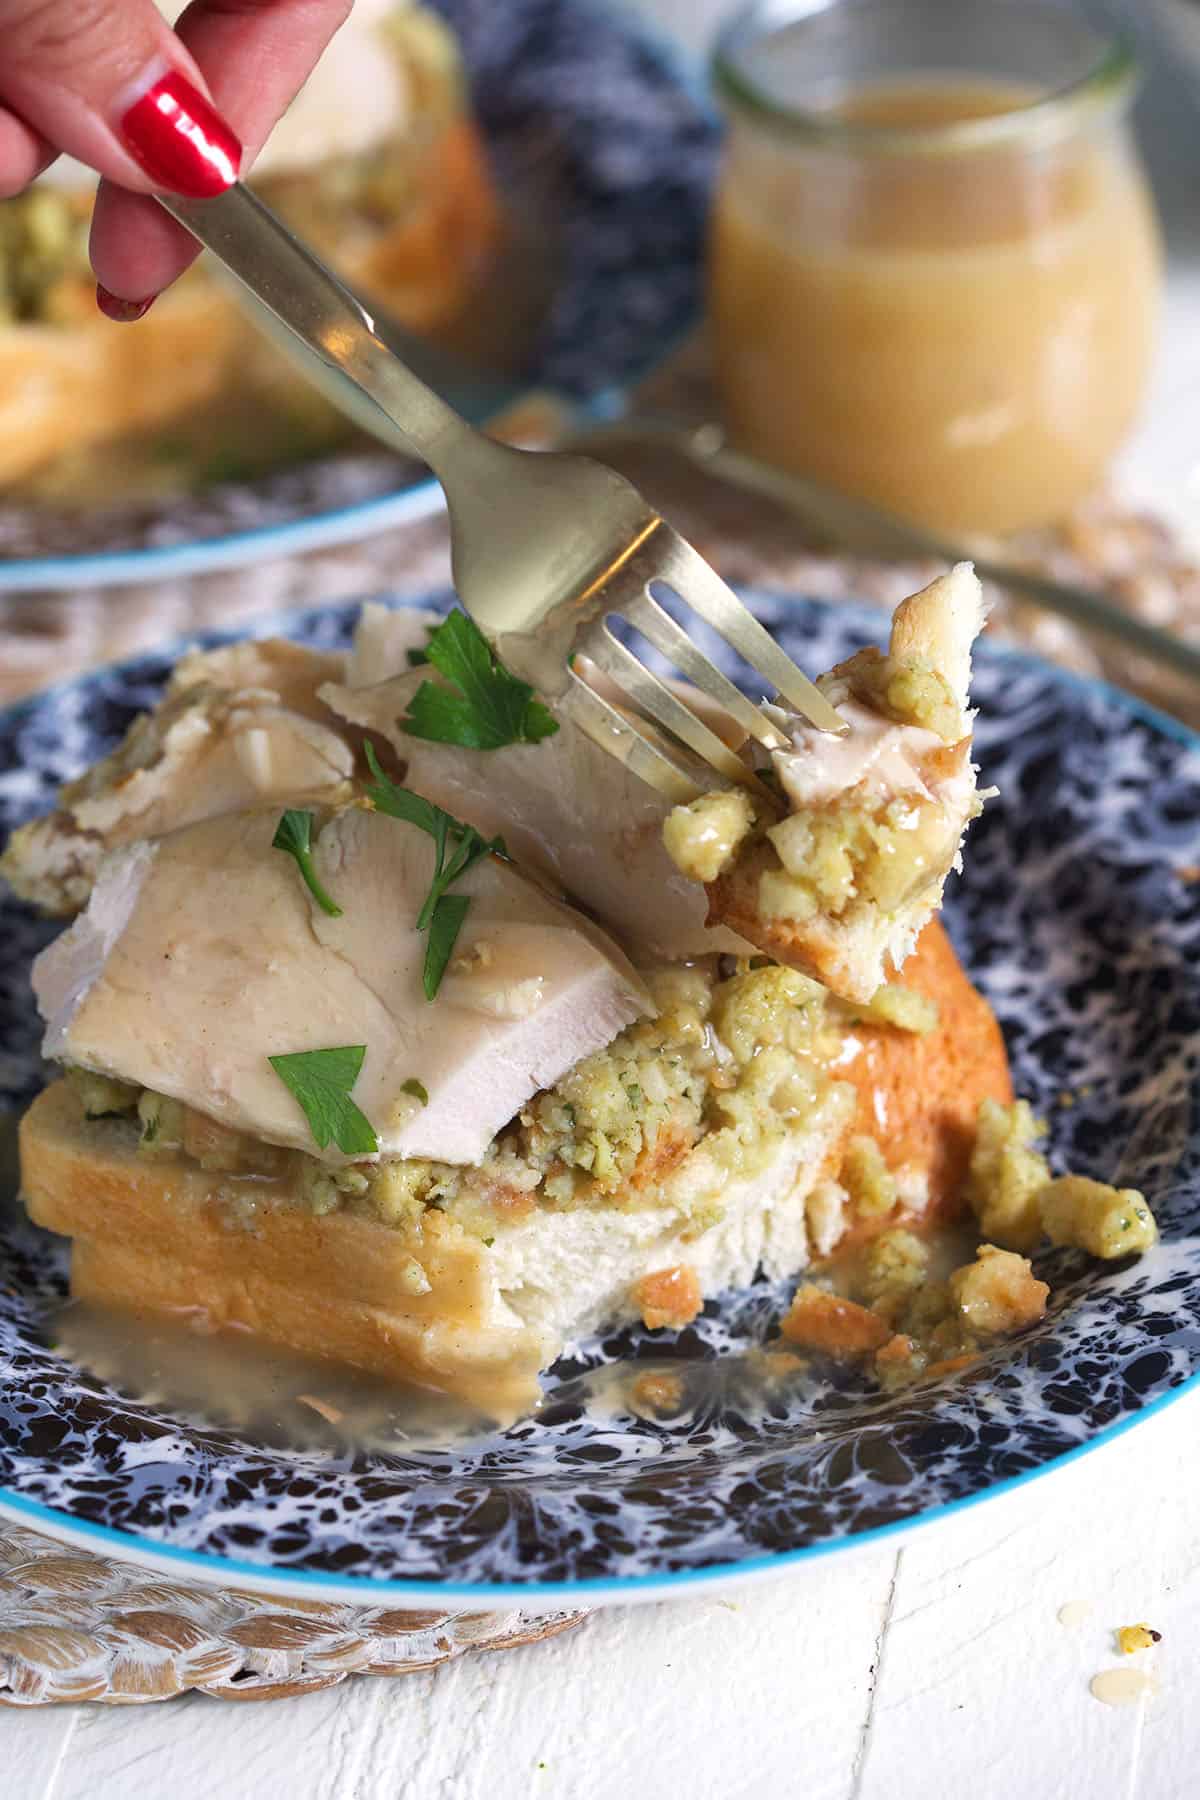 A fork is taking a bite out of an open faced turkey sandwich.